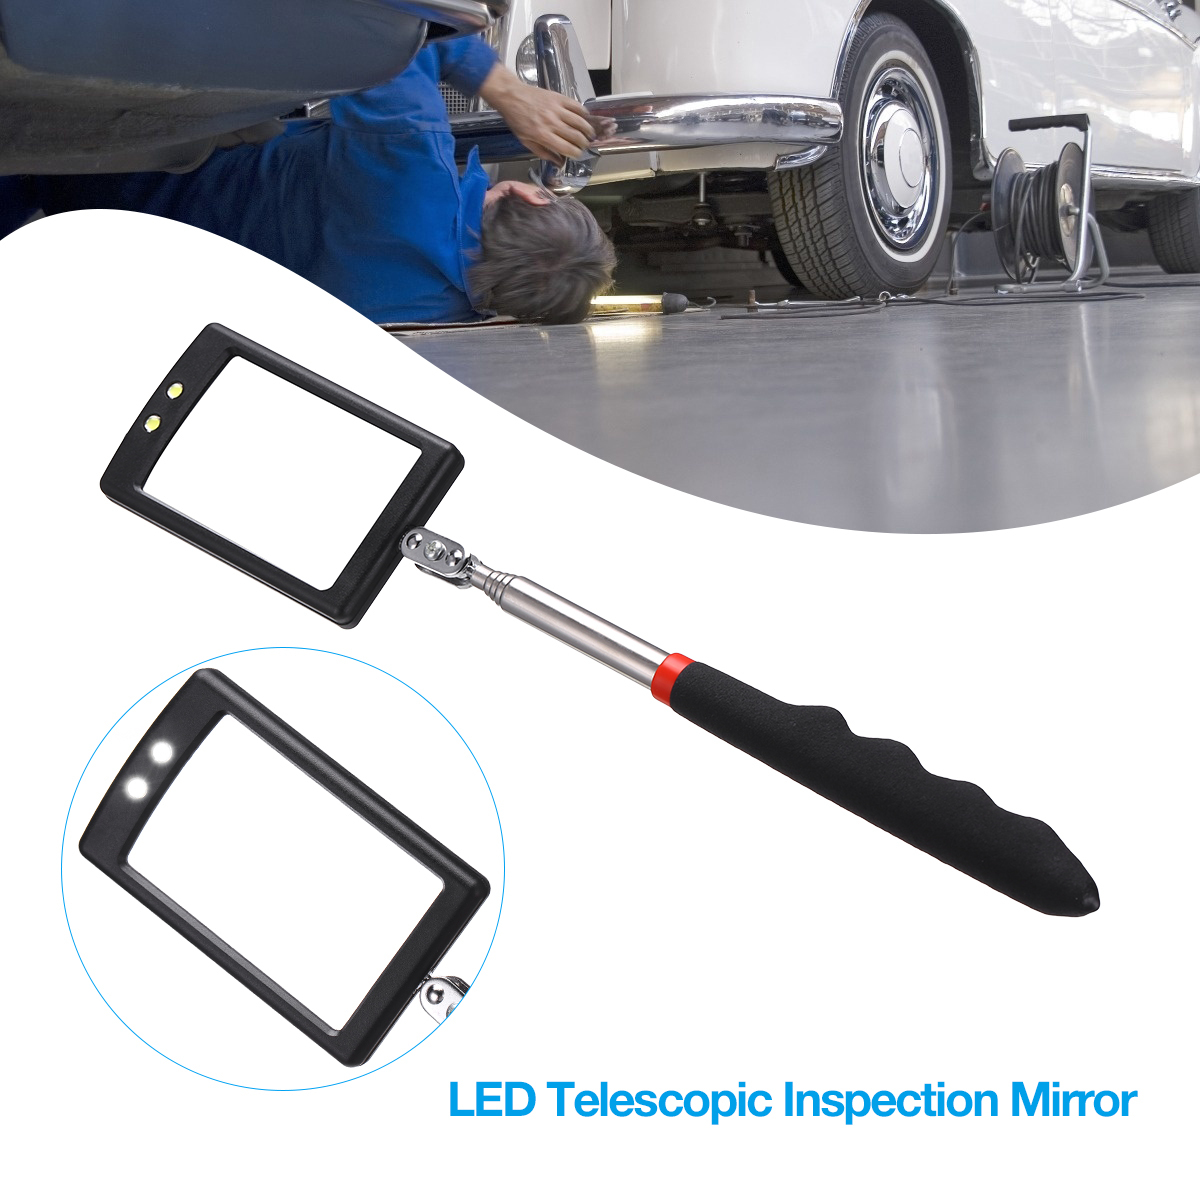 Telescoping LED Lighted Flexible Inspection Mirror 360 Swivel for Extra Viewing 